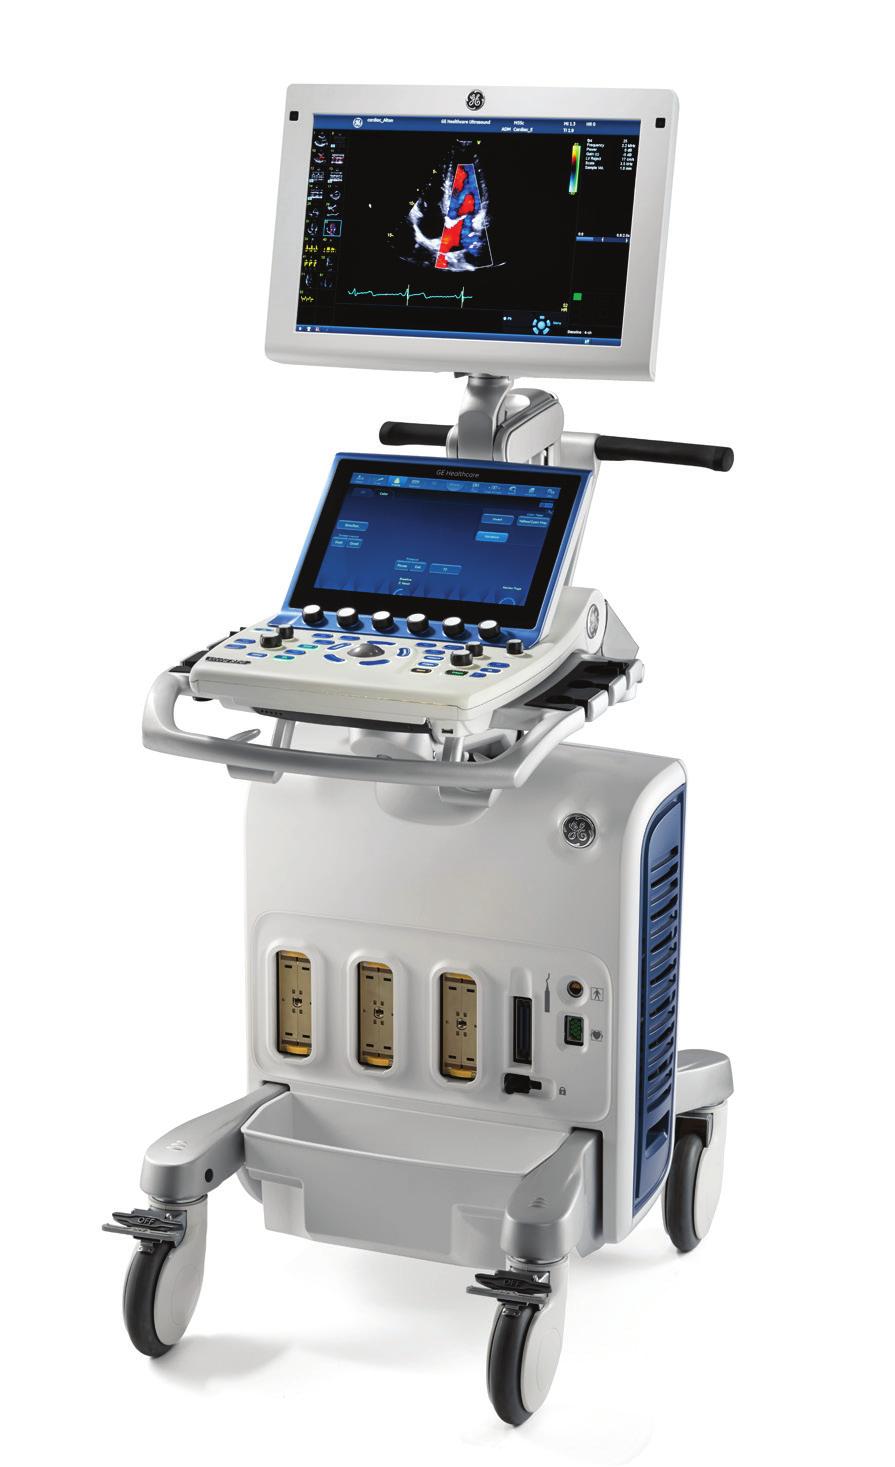 csound A powerful, software-based beamformer image reconstruction platform Figure 1: Vivid S70 and E90/95; first GE systems built upon the csound platform Background GE s cardiovascular ultrasound